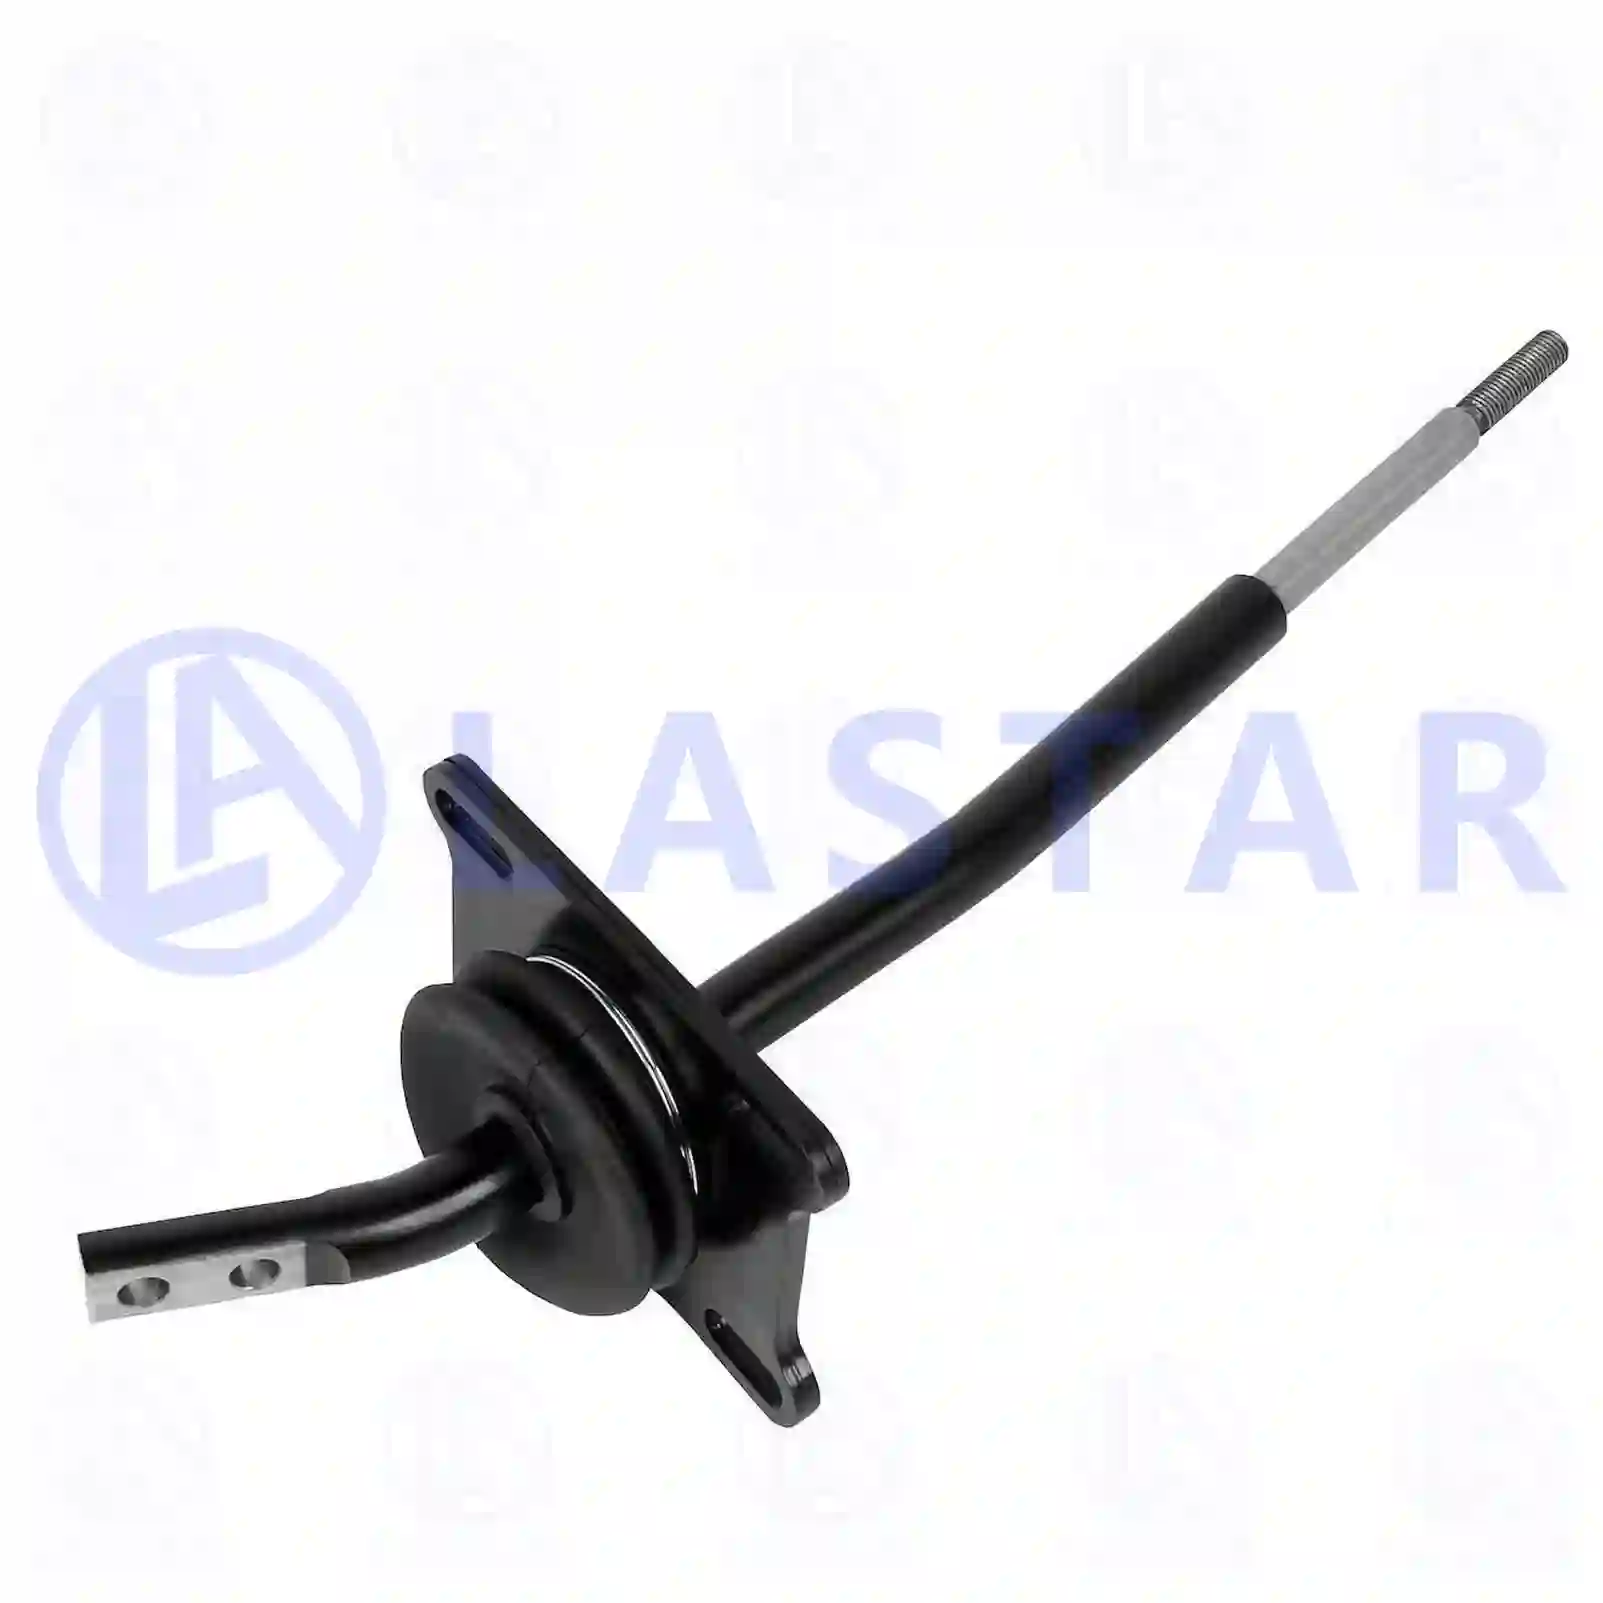 Gear shift lever, 77731927, 41001729 ||  77731927 Lastar Spare Part | Truck Spare Parts, Auotomotive Spare Parts Gear shift lever, 77731927, 41001729 ||  77731927 Lastar Spare Part | Truck Spare Parts, Auotomotive Spare Parts